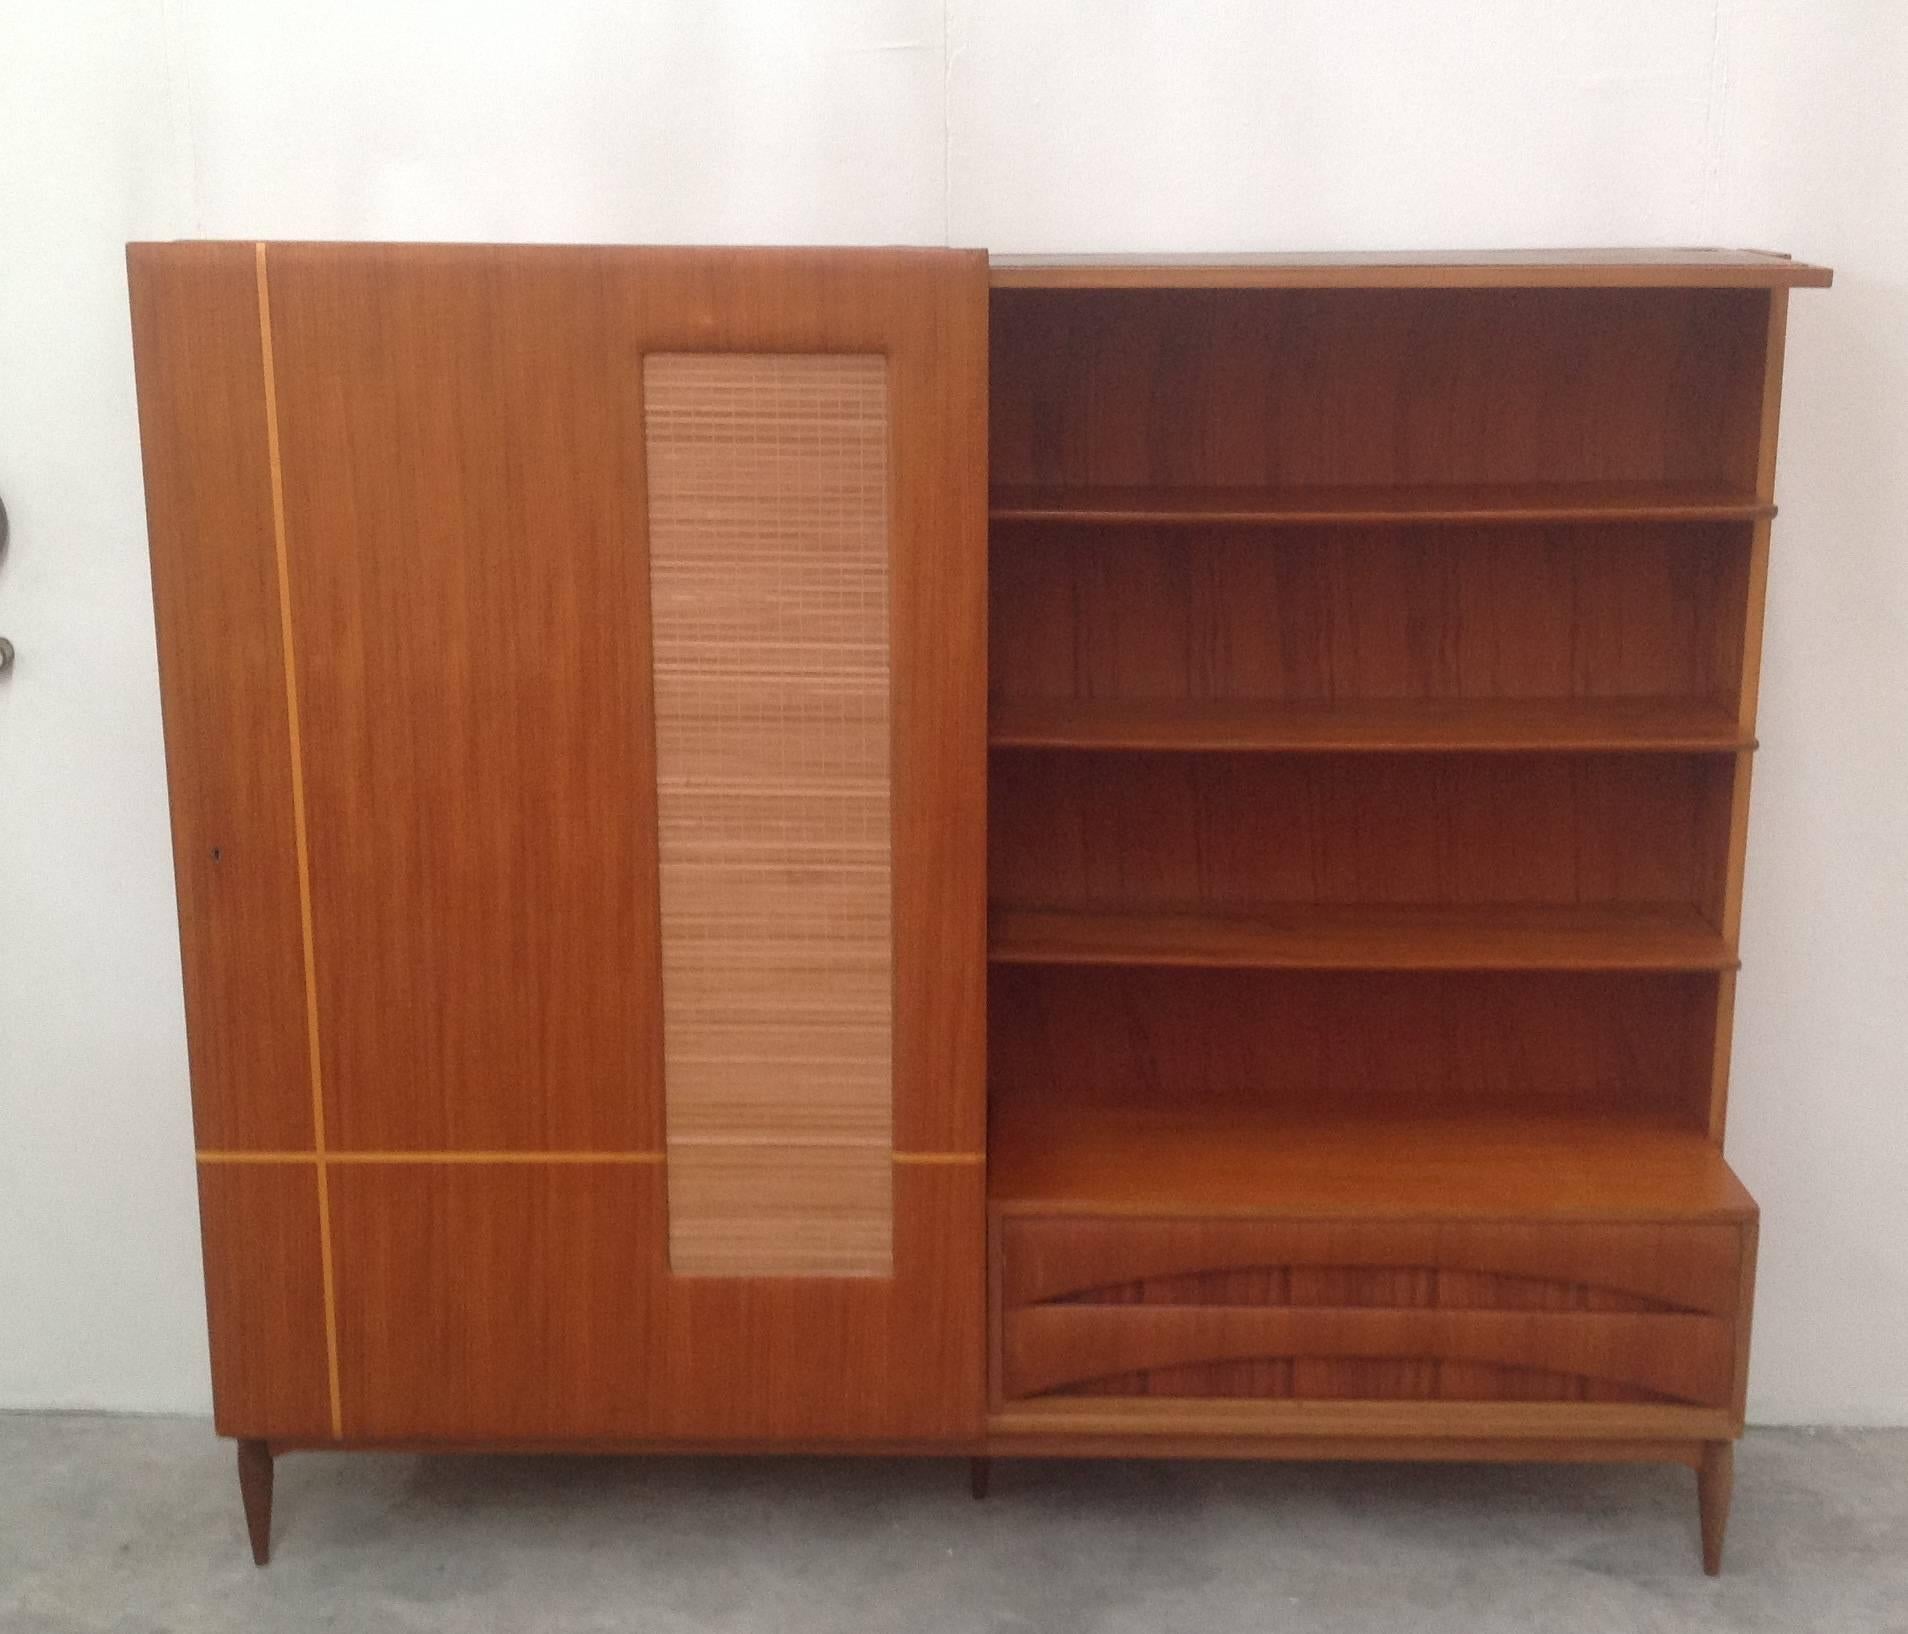 Very nice bookcase with sliding decorated door.